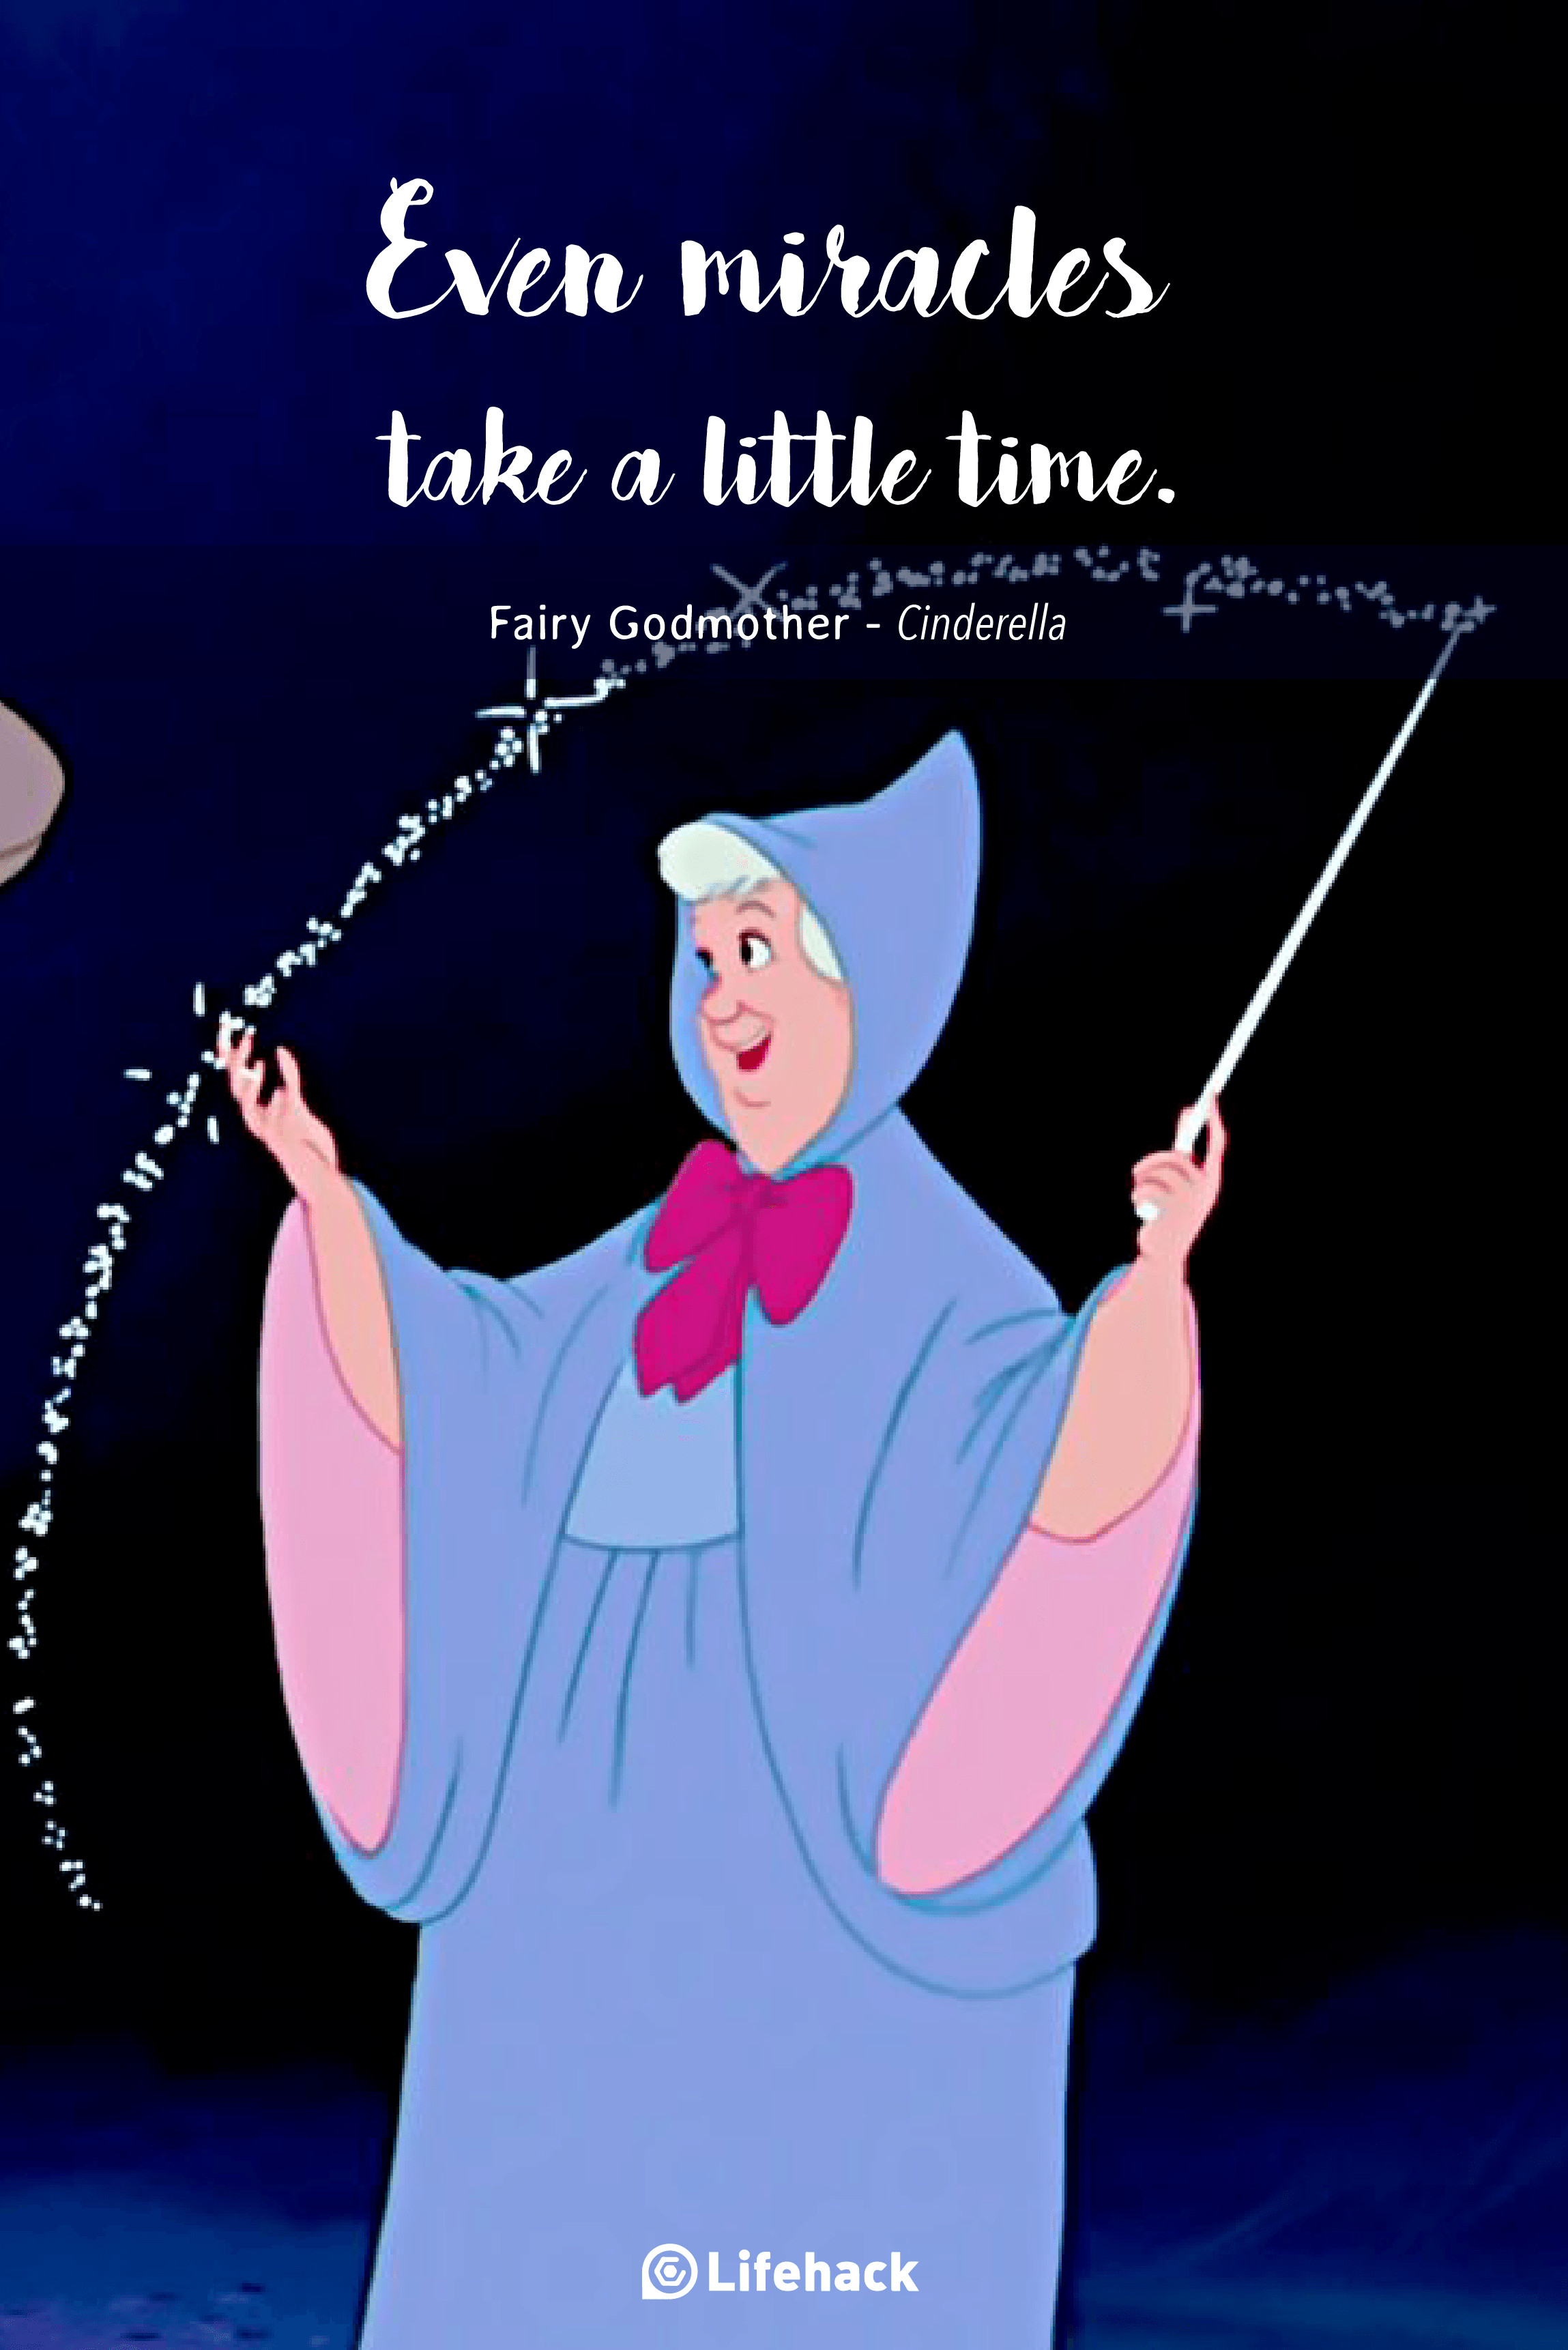 Cinderella Fairy Godmother Quotes
 20 Charming Disney Quotes to Warm Your Heart